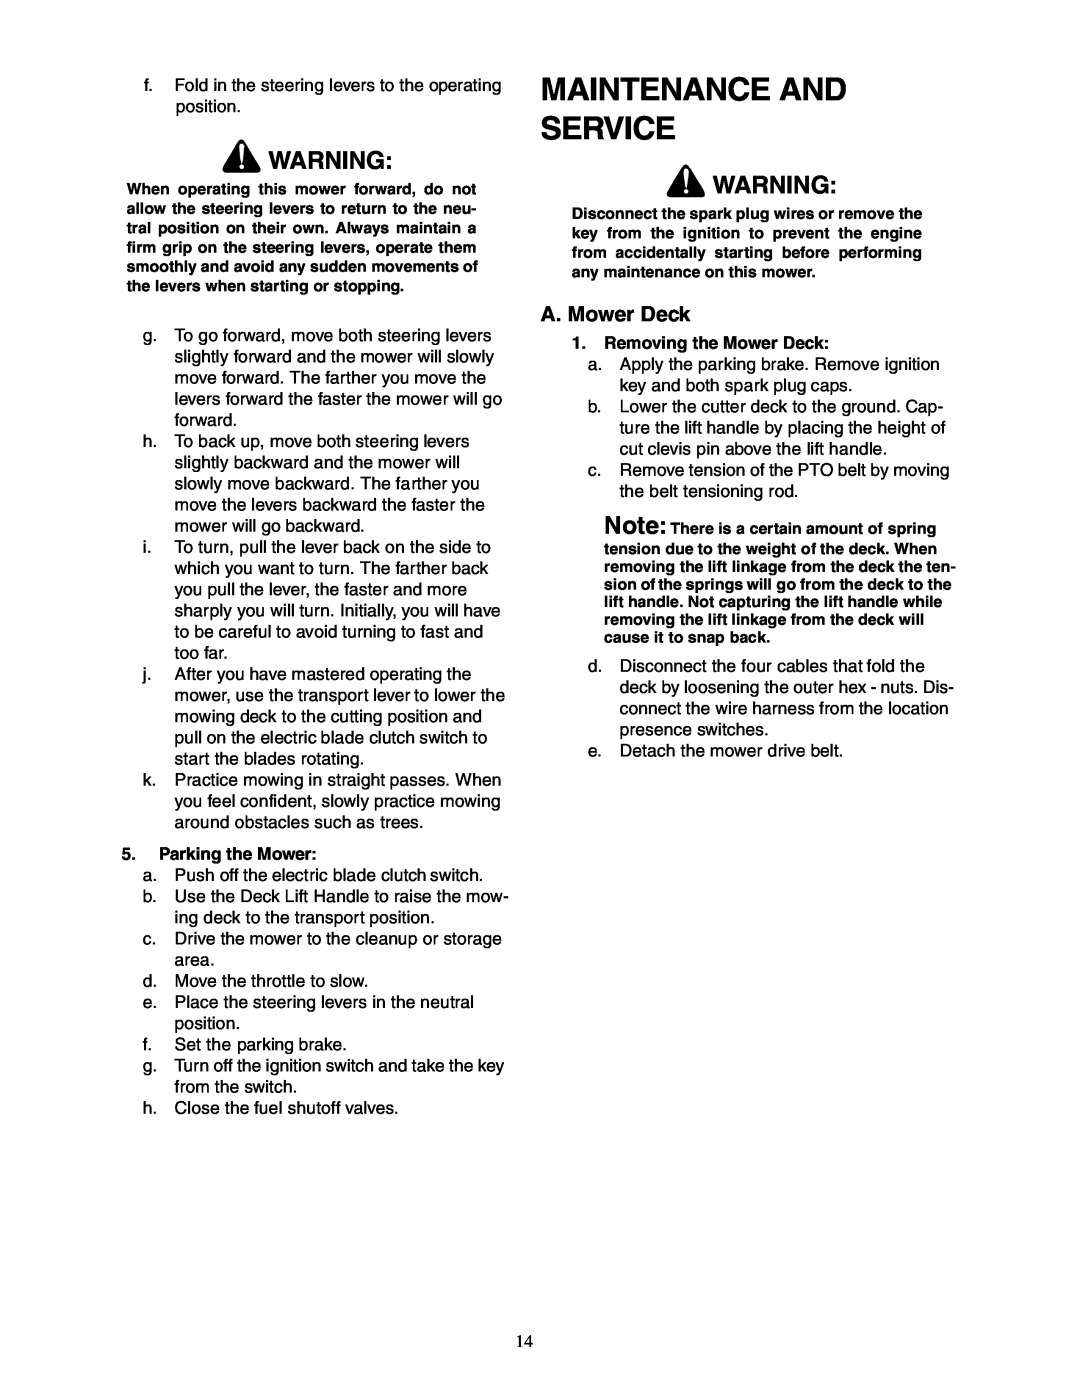 Cub Cadet Z - Wing 48 service manual Maintenance And Service, A. Mower Deck 